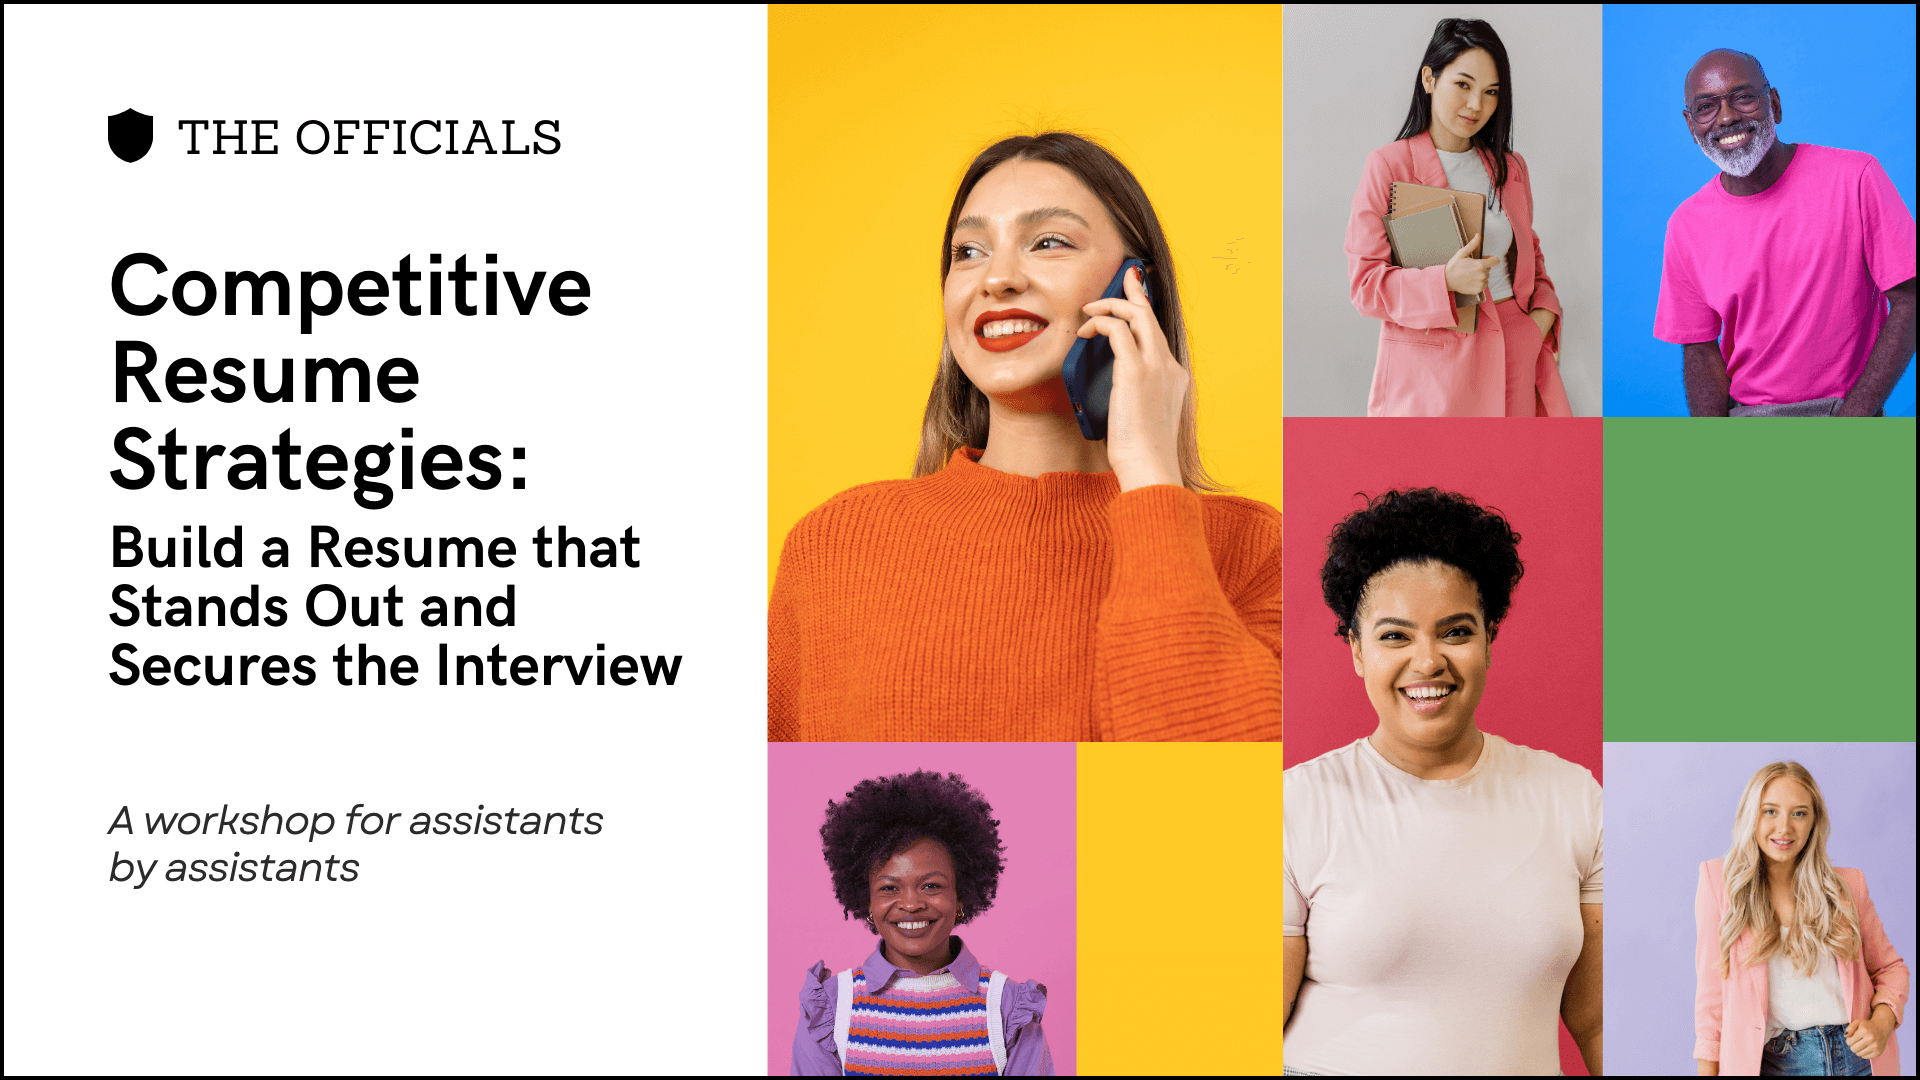 Competitive Resume Strategies: Build a Resume that Stands Out and Secures the Interview – Workshop for Administrative Professionals
